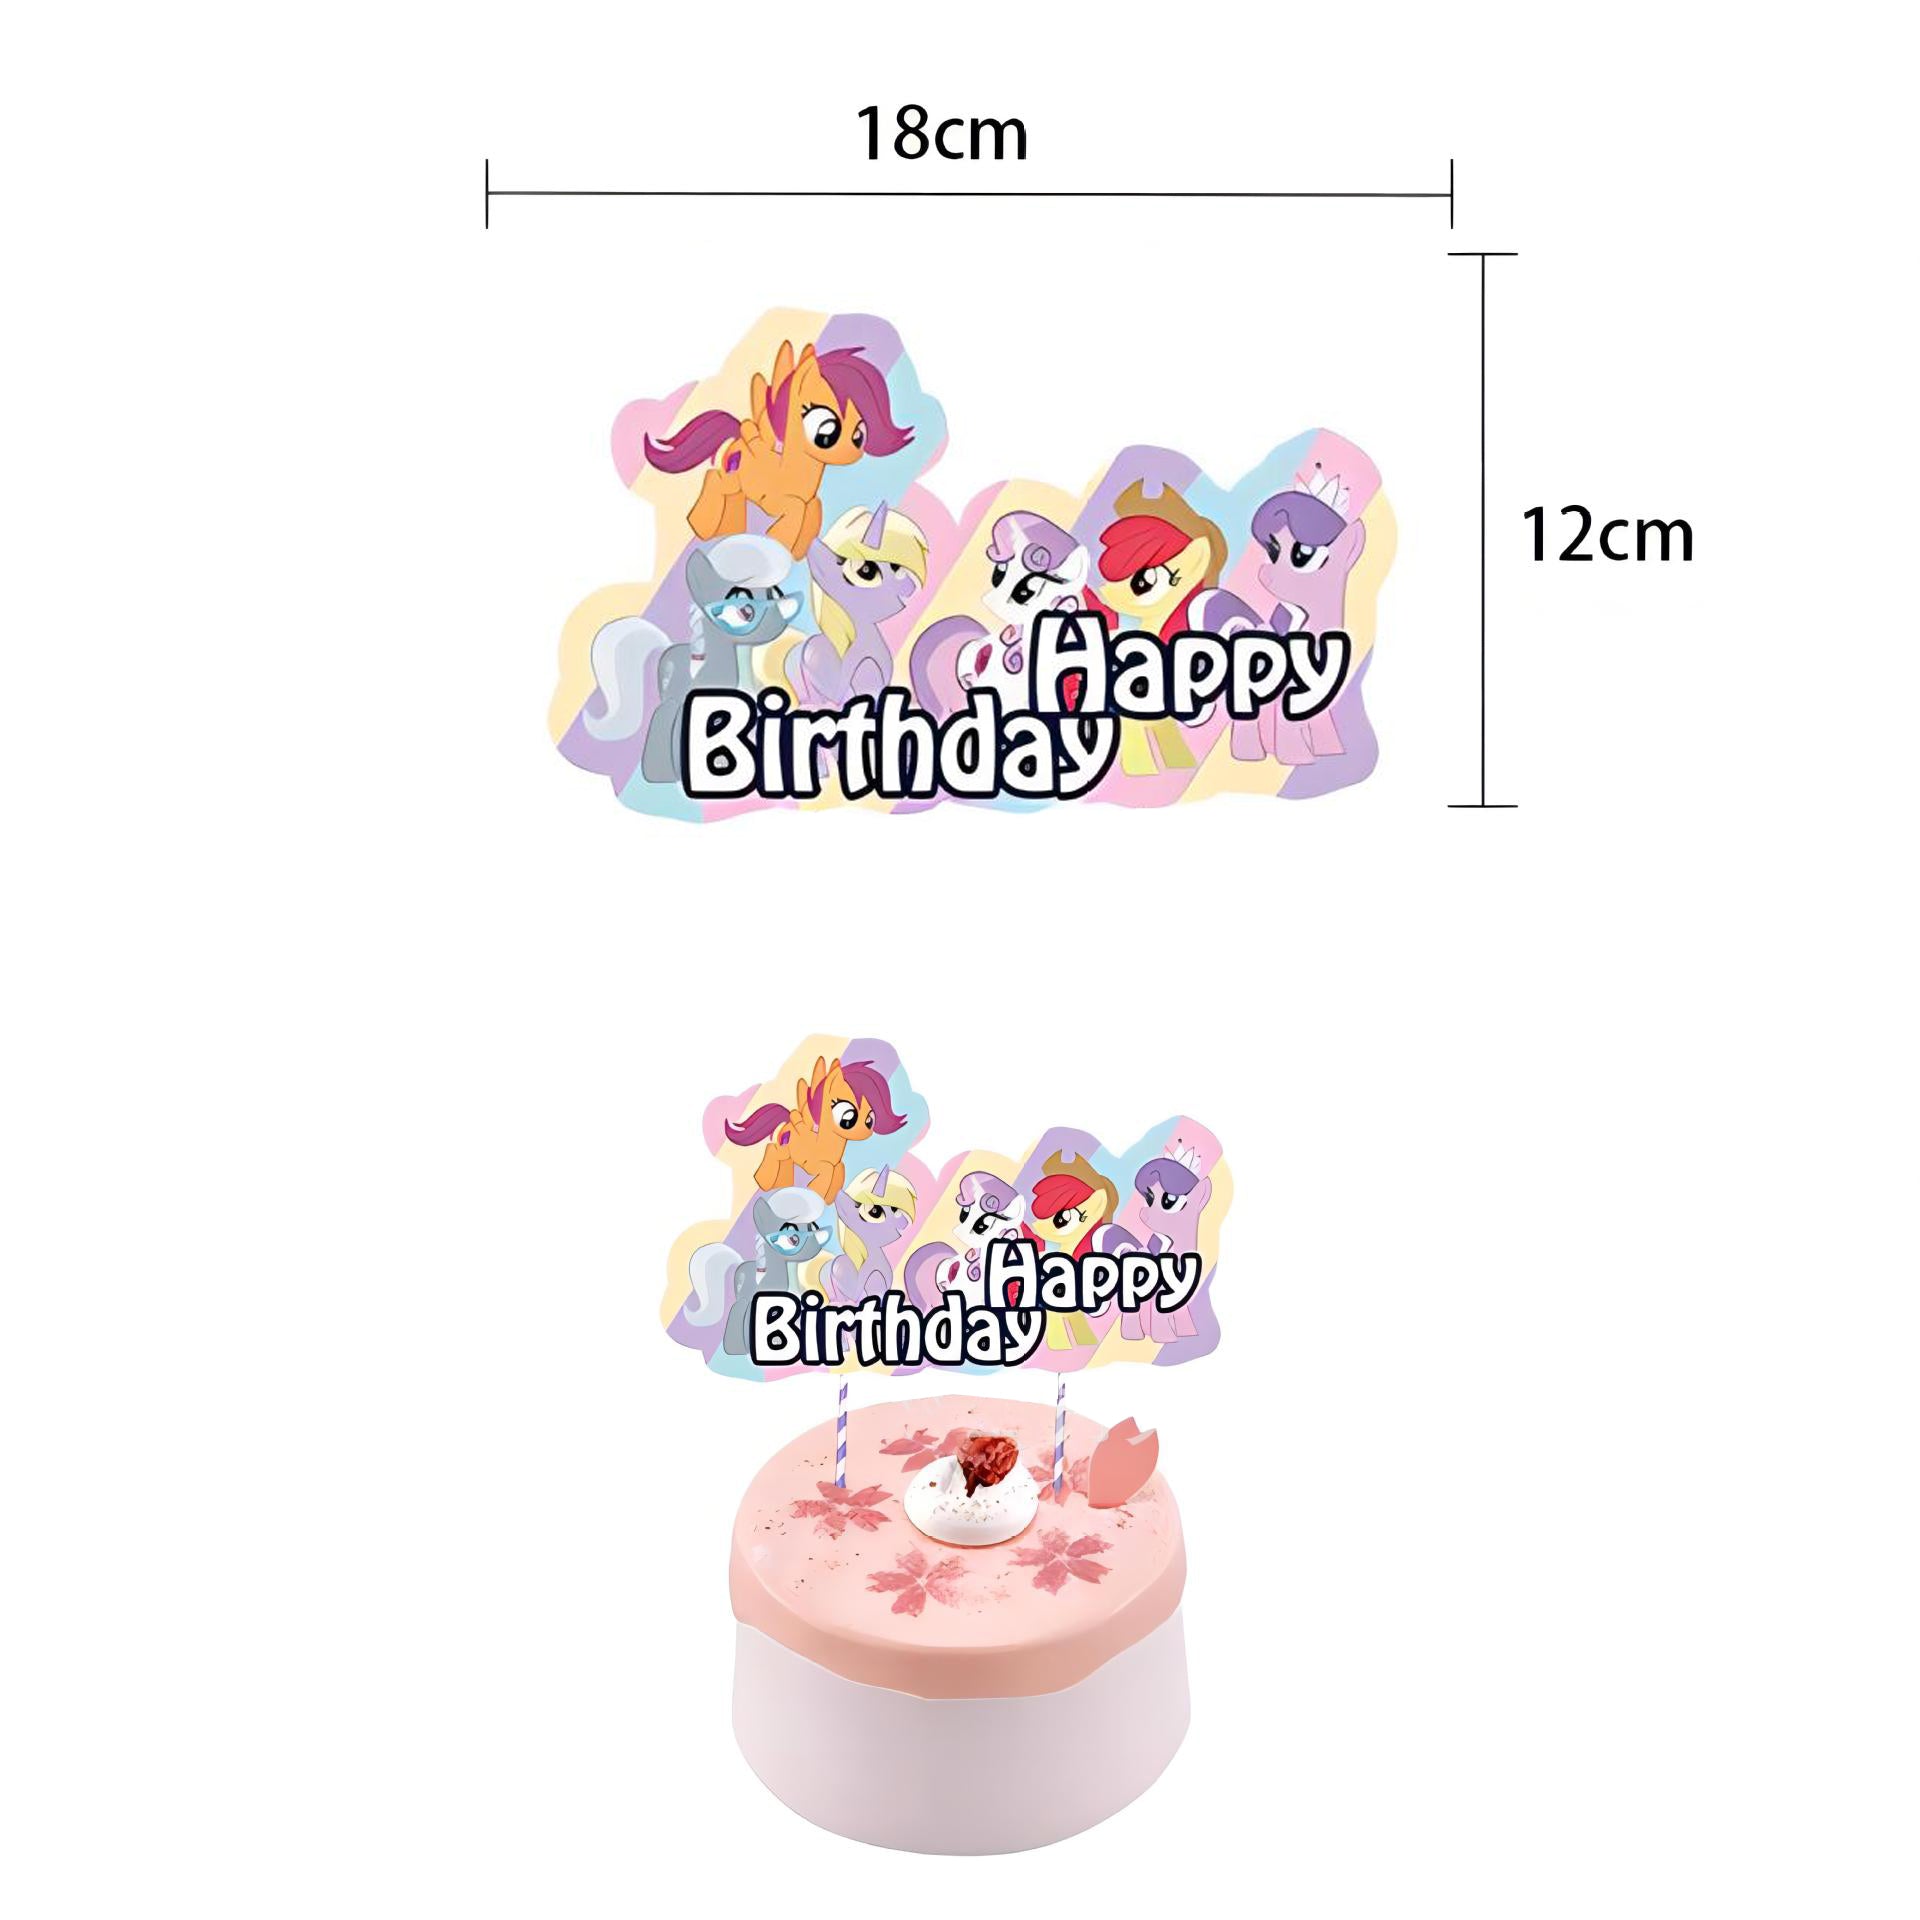 Little Pony Birthday Party Supplies.